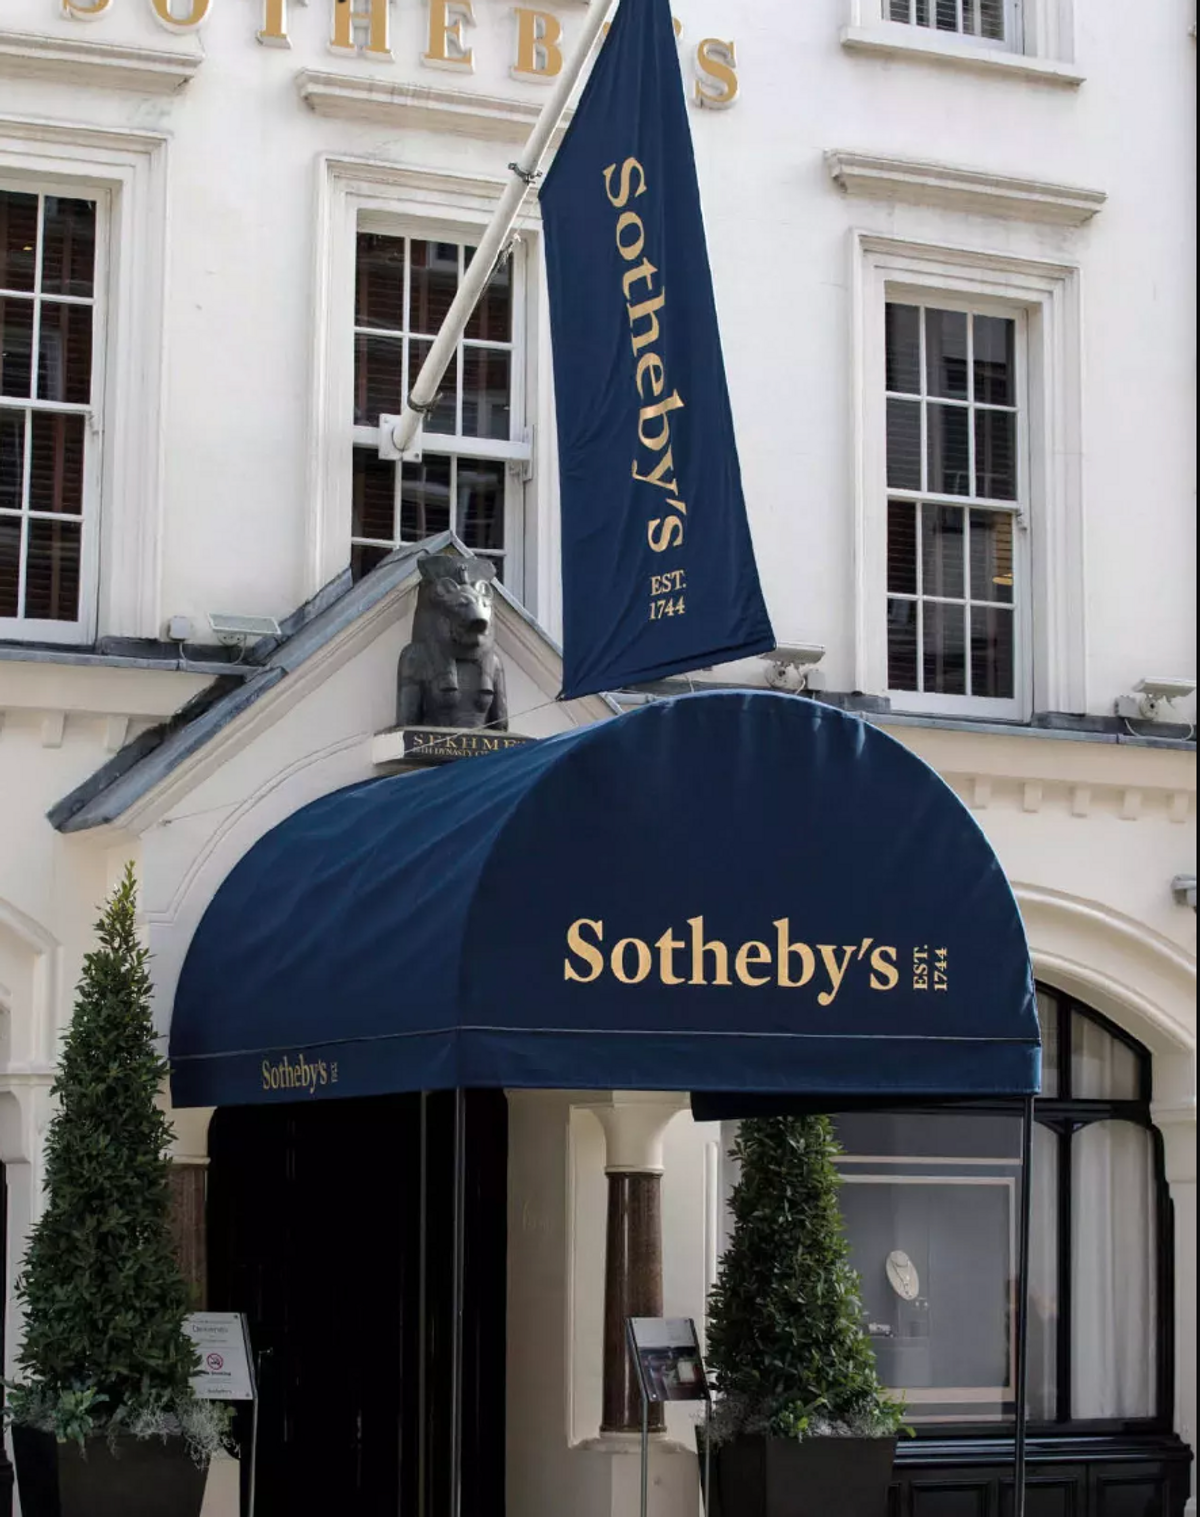 Former Sotheby's chief operating officer Clive Graham Lord has written a book about a fictional auction house  